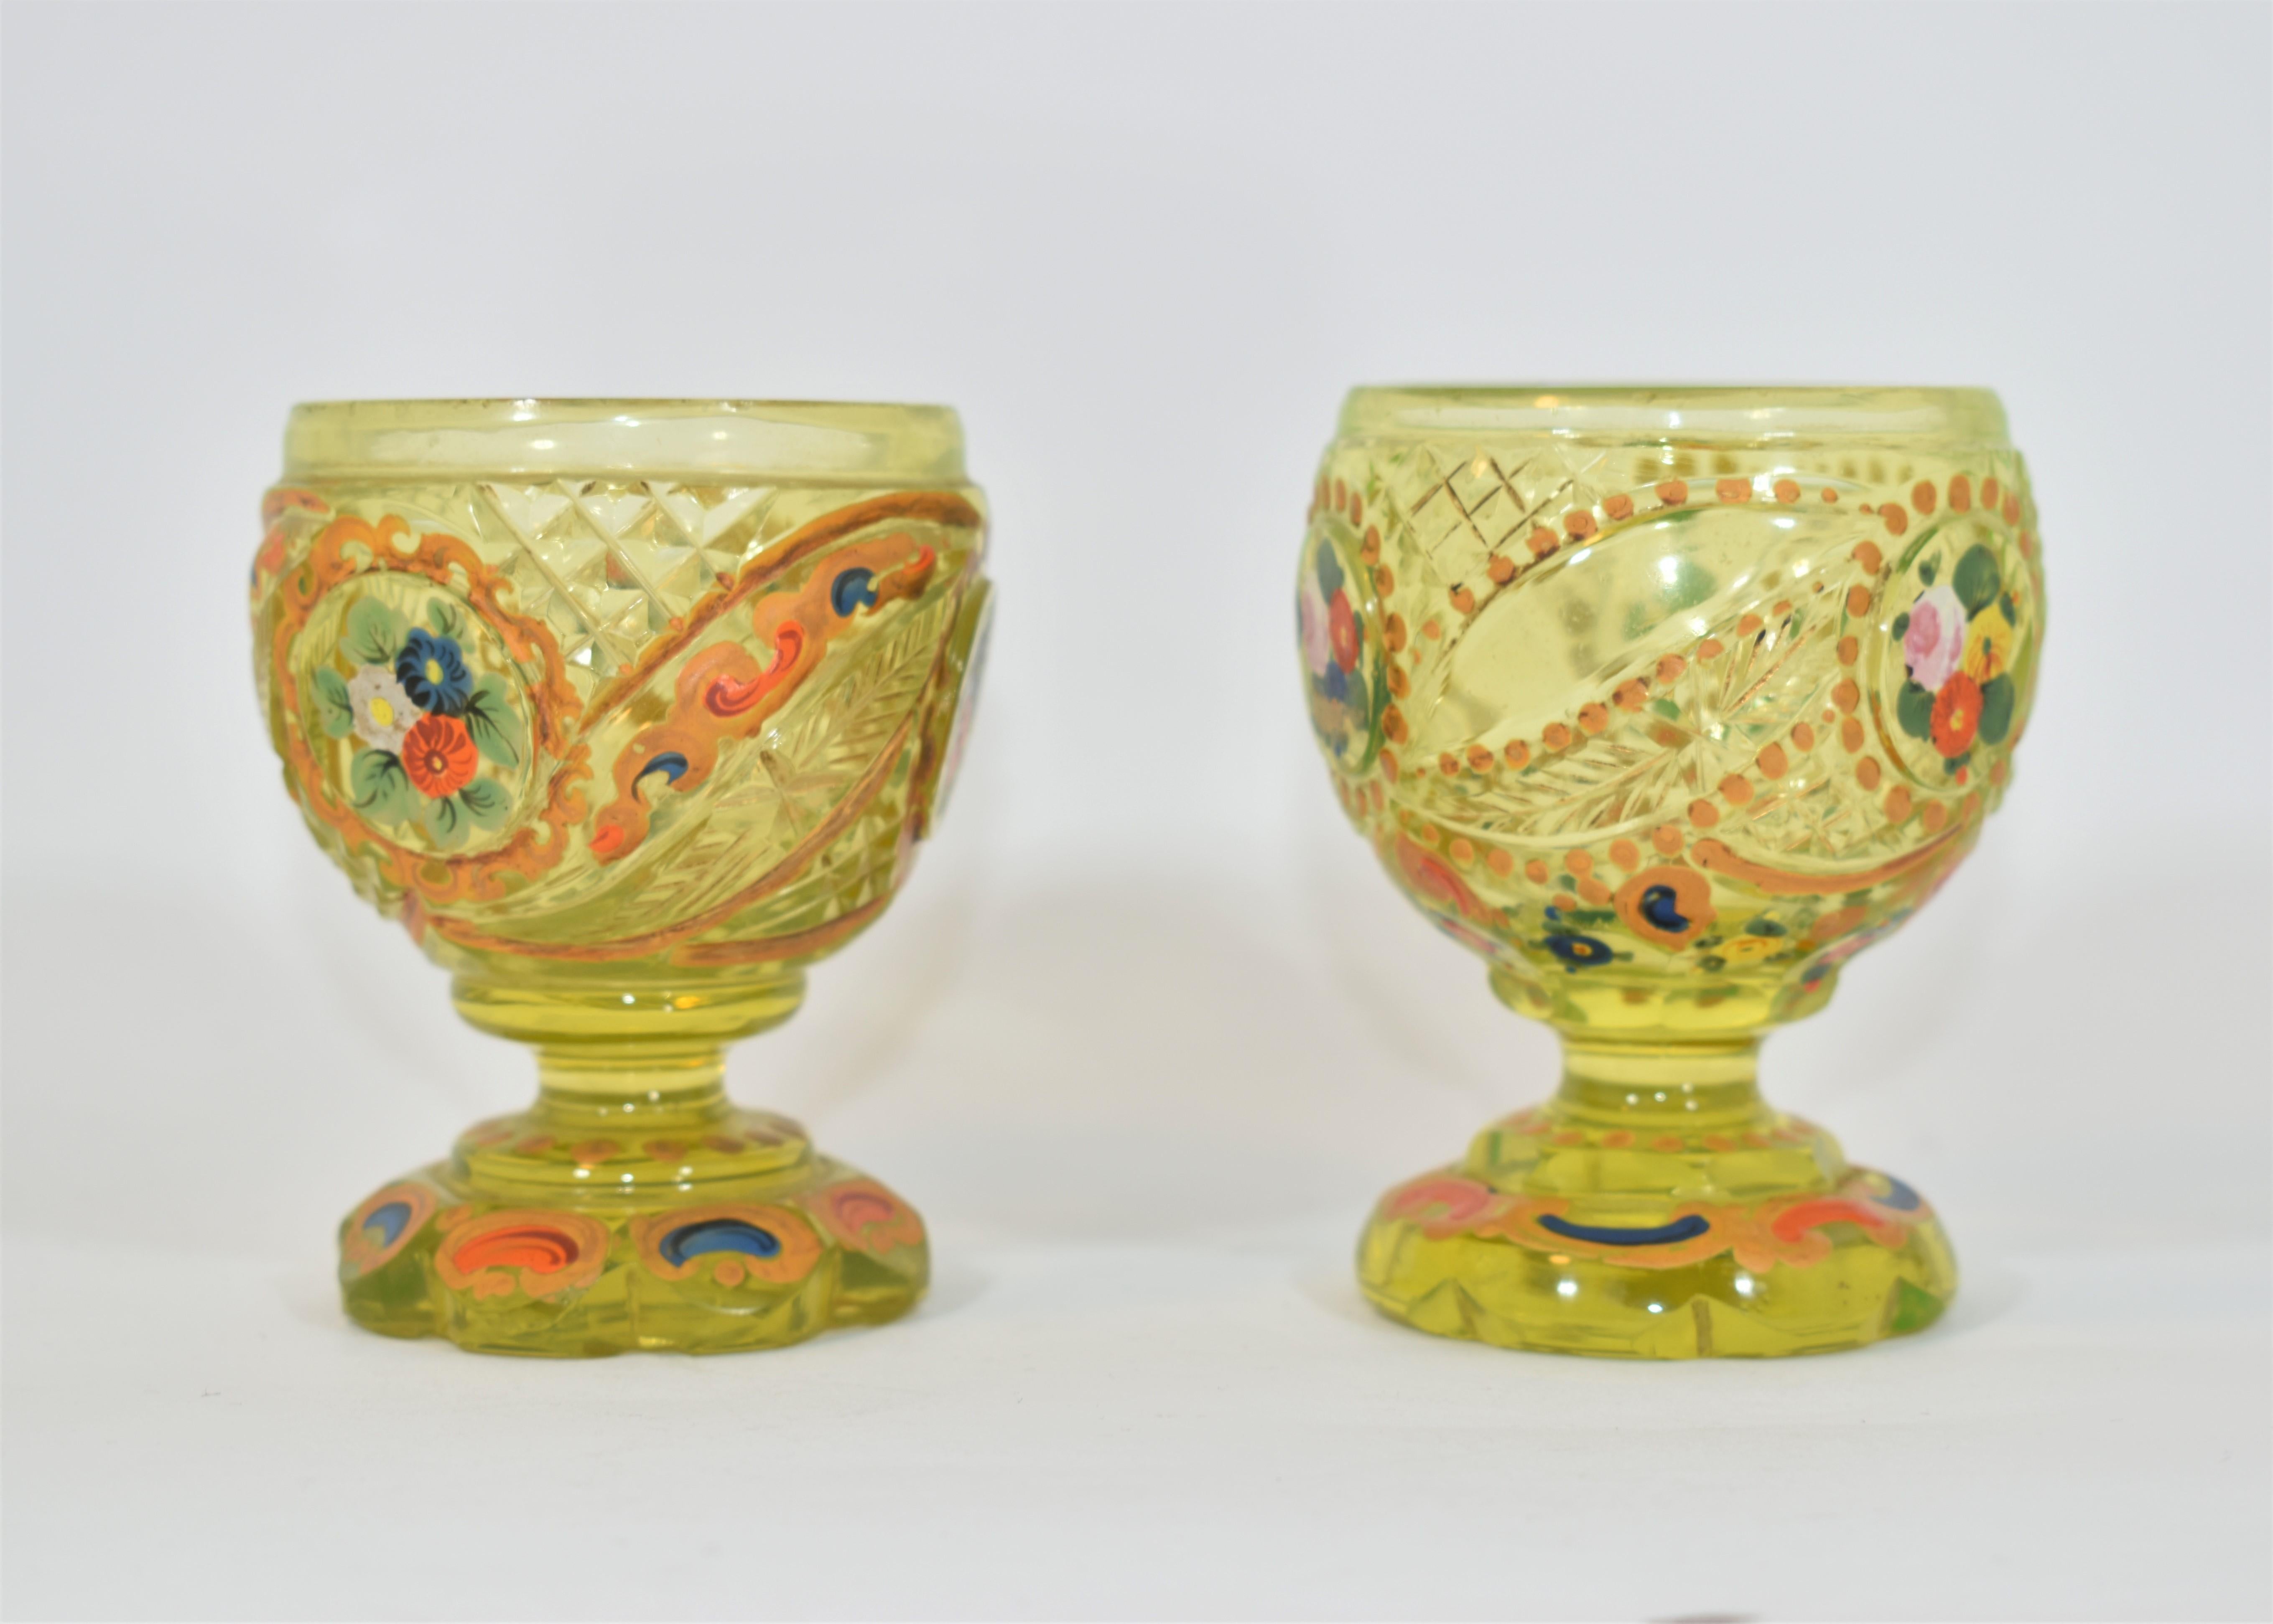 Two Antique Islamic Bohemian Uranium Glass Sugar Bowls, 19th Century In Good Condition For Sale In Rostock, MV